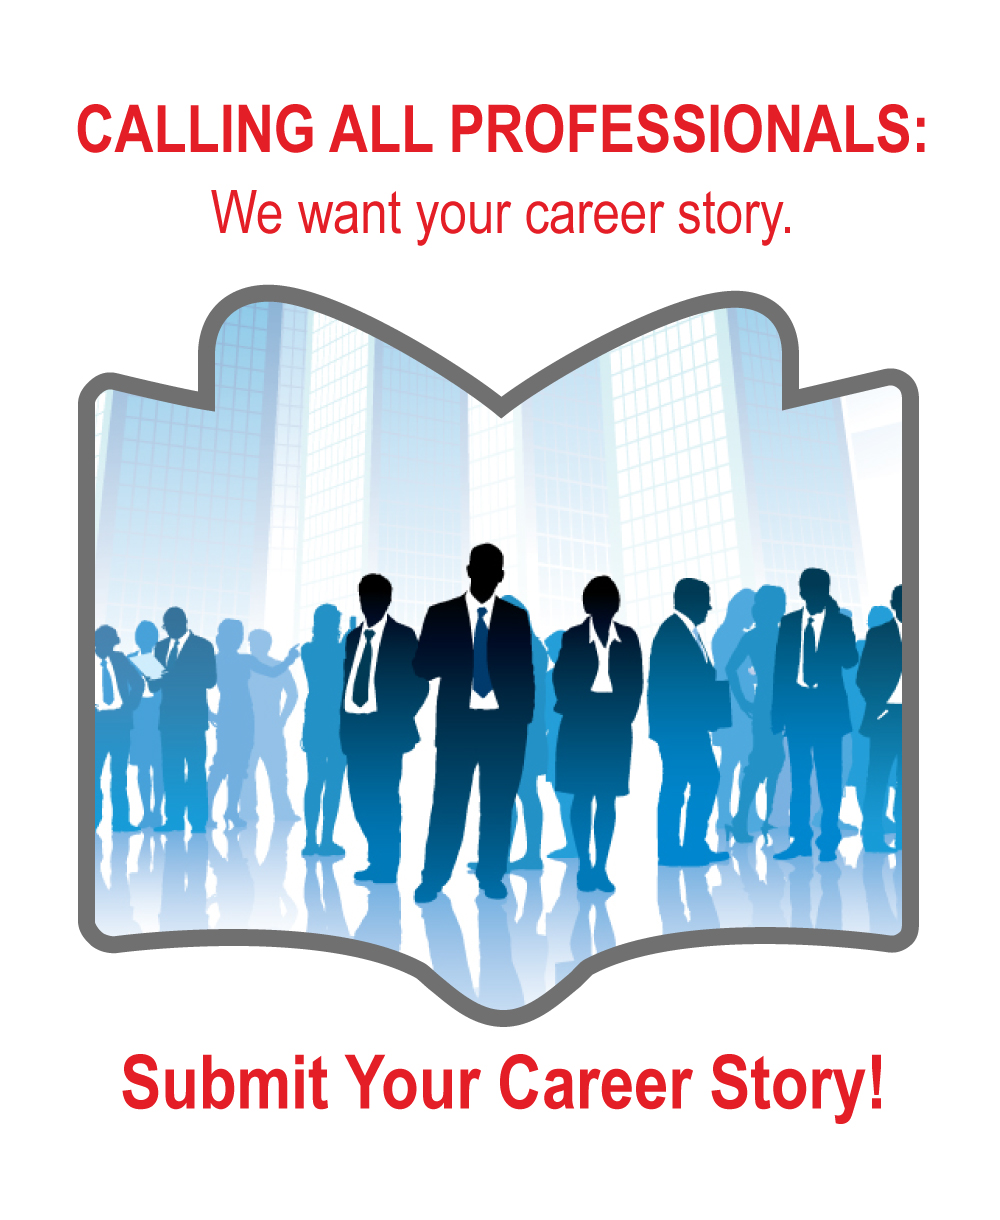 Submit Your Career Story